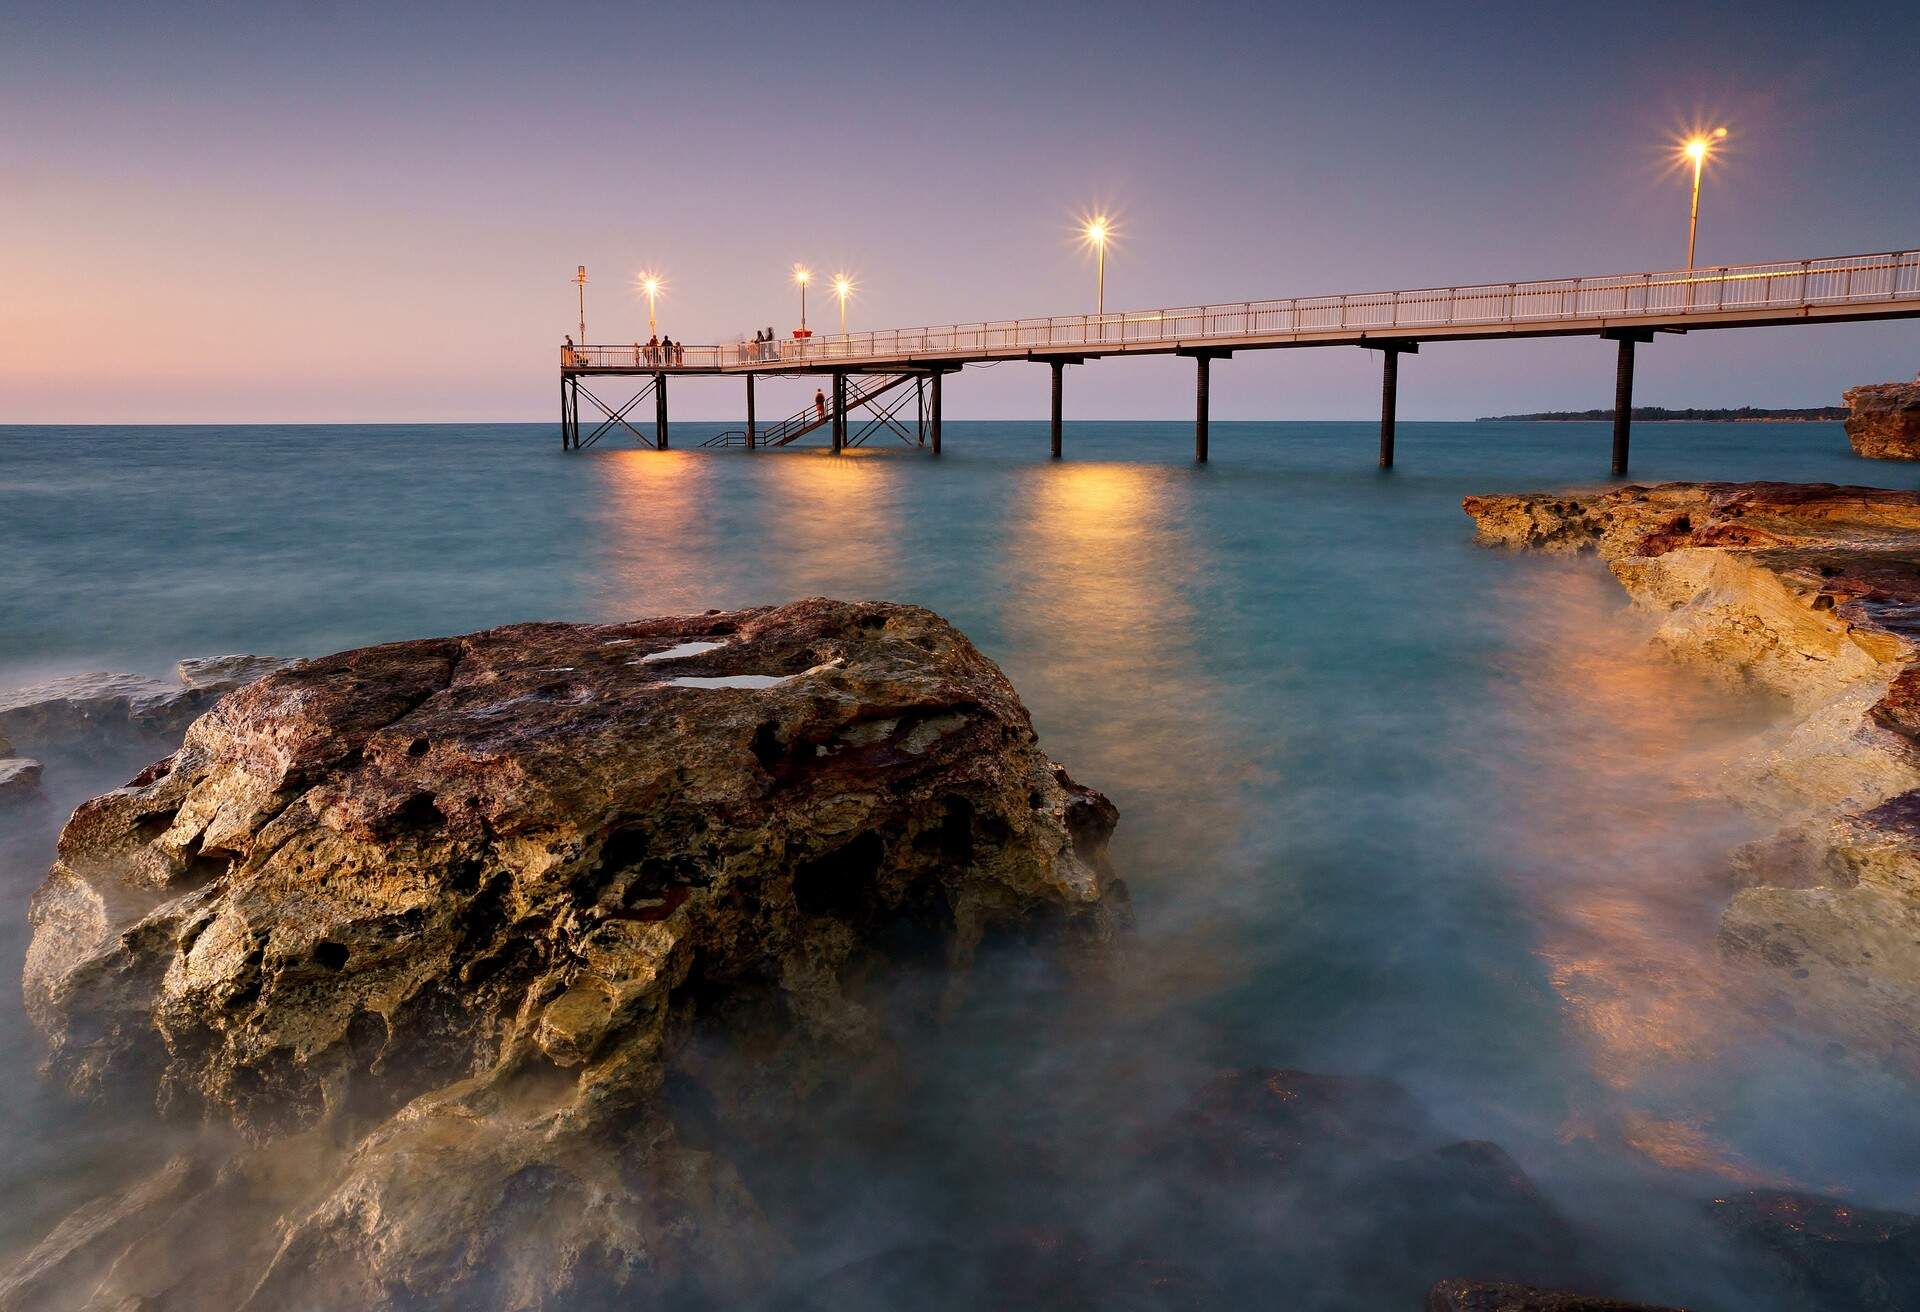 Sunset at Nightcliff Jetty in Darwin Northern Territory Australia during high tide with rocks surrounded by water.